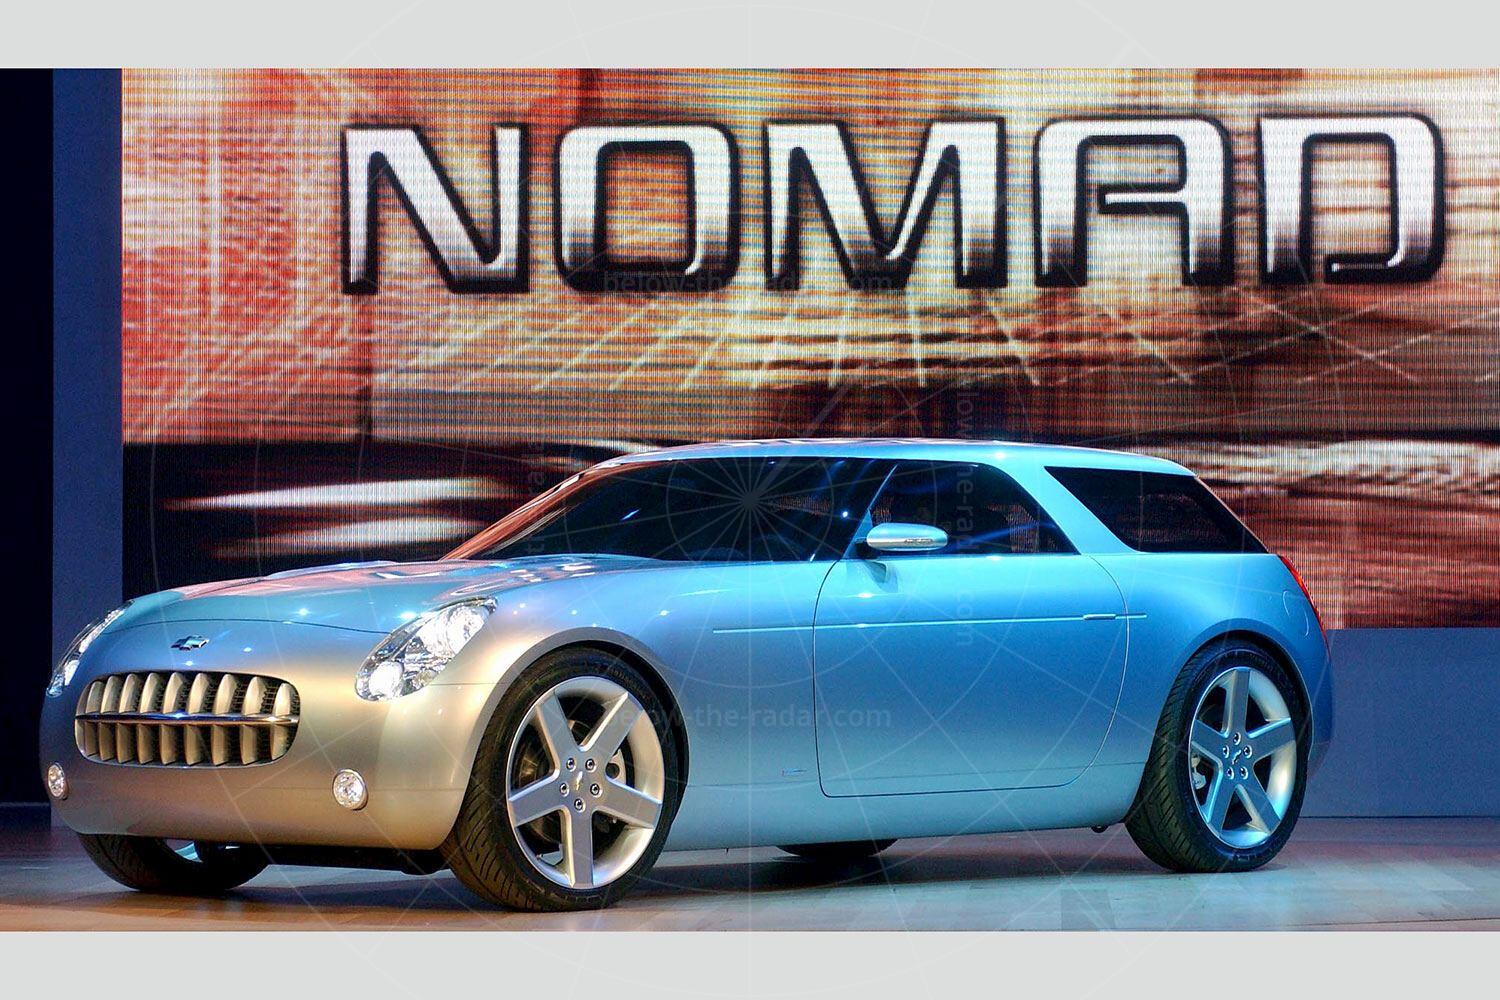 The 2004 Chevrolet Nomad concept being unveiled at the 2004 Detroit motor show Pic: GM | The 2004 Chevrolet Nomad concept being unveiled at the 2004 Detroit motor show